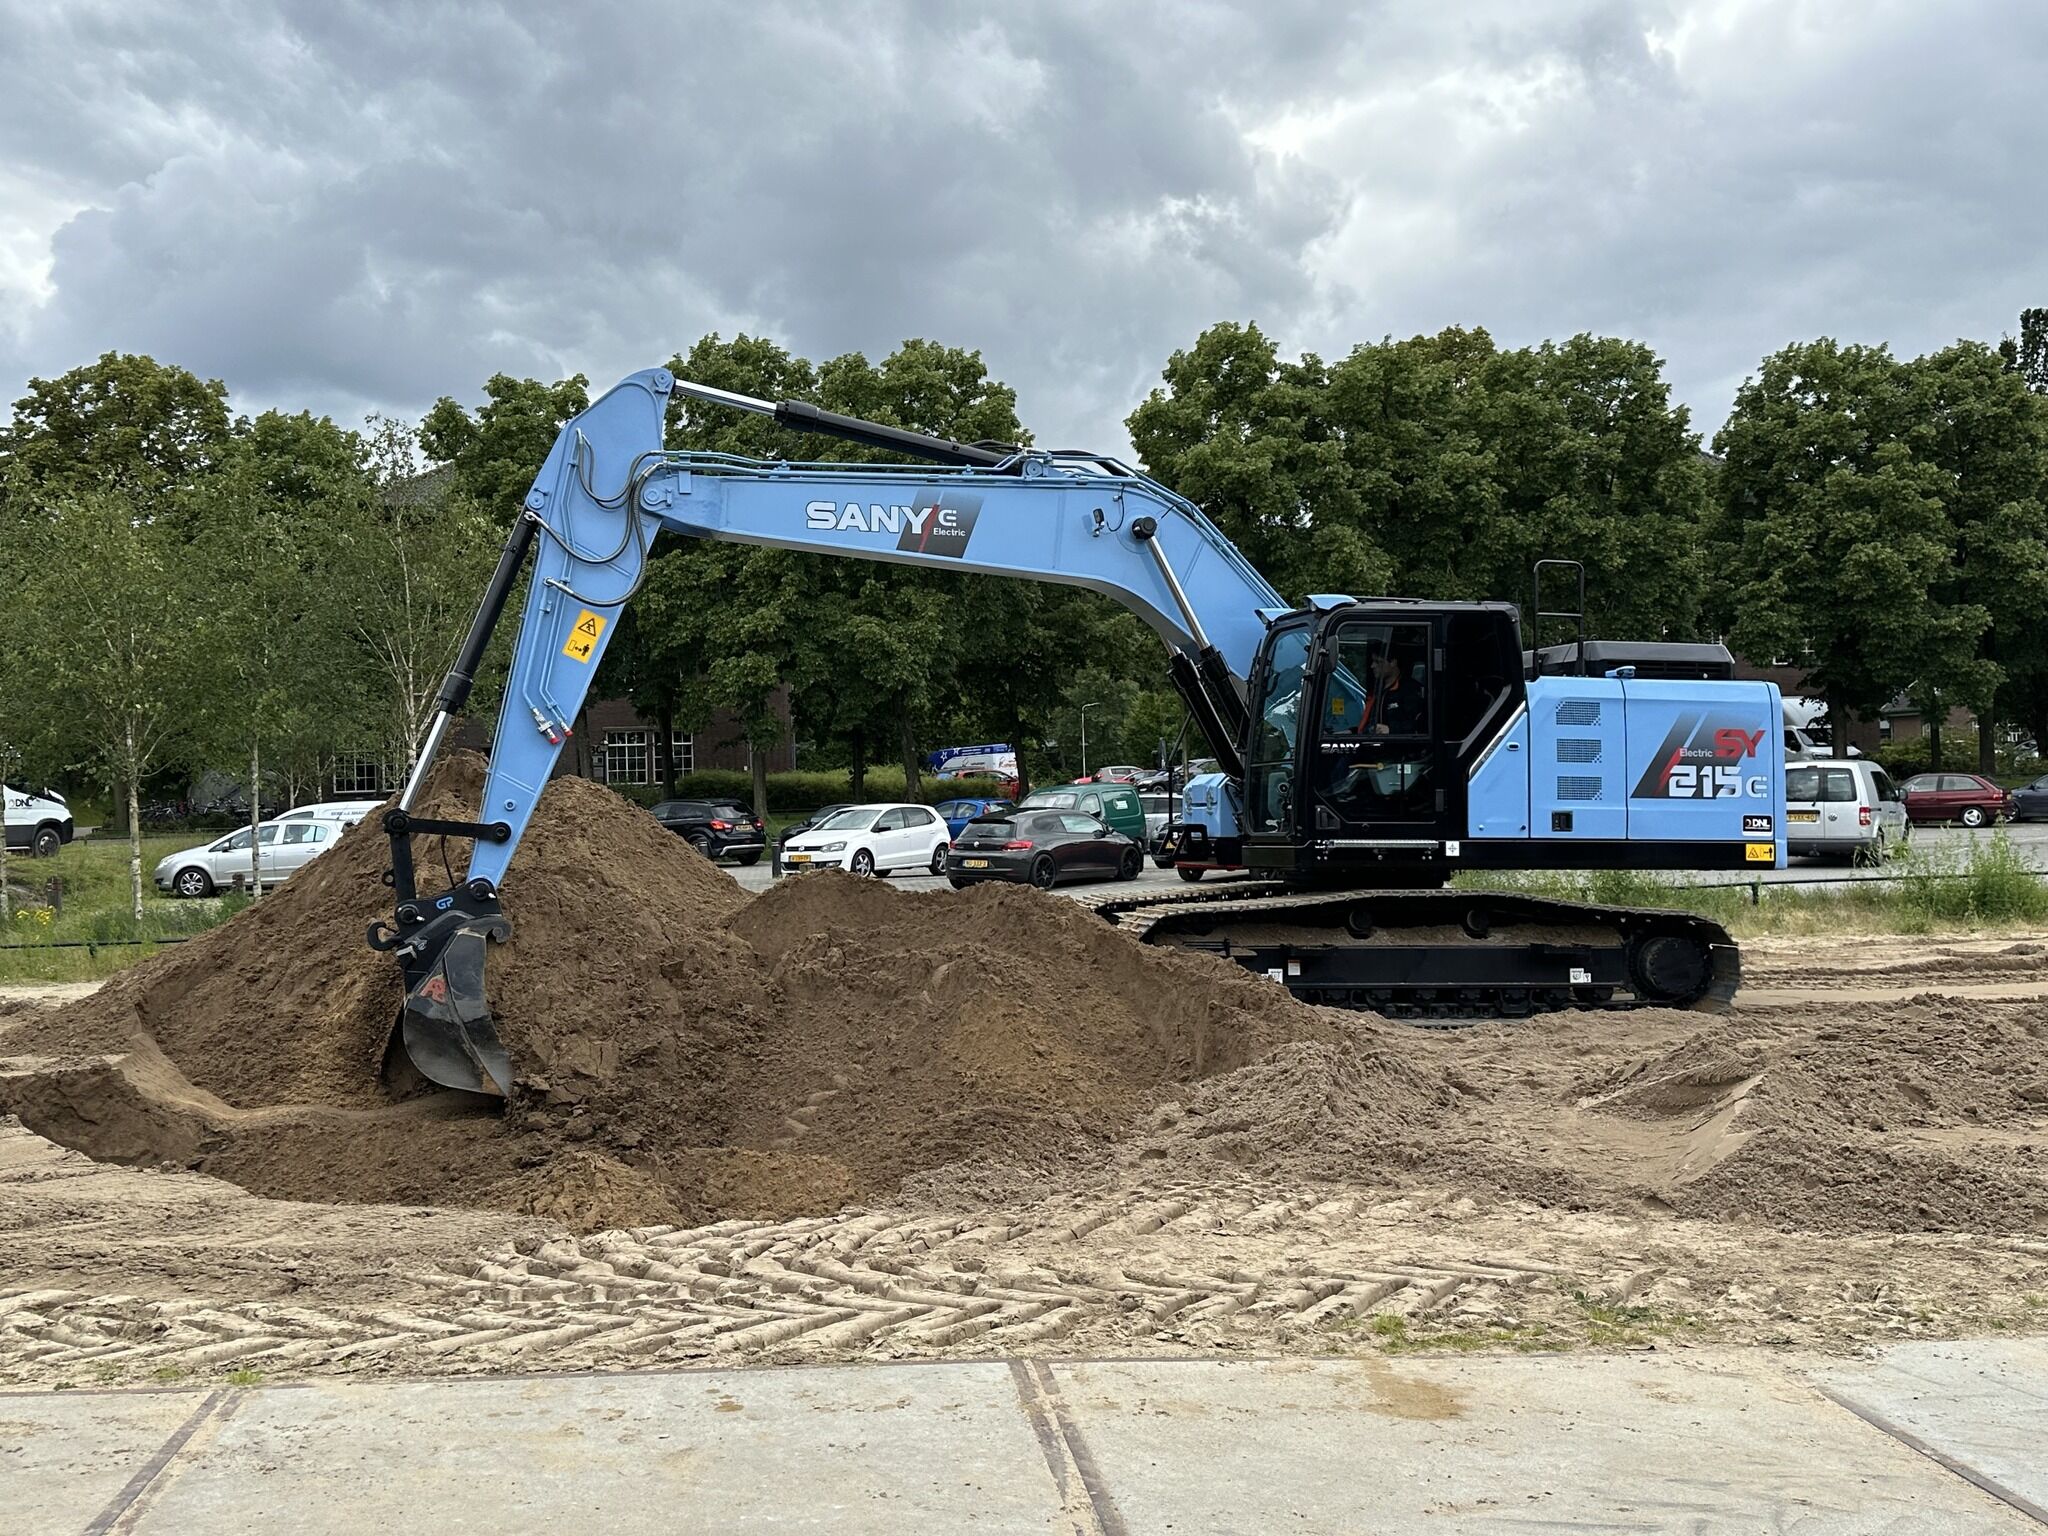 European debut of our fully electric excavator, the SY215E!